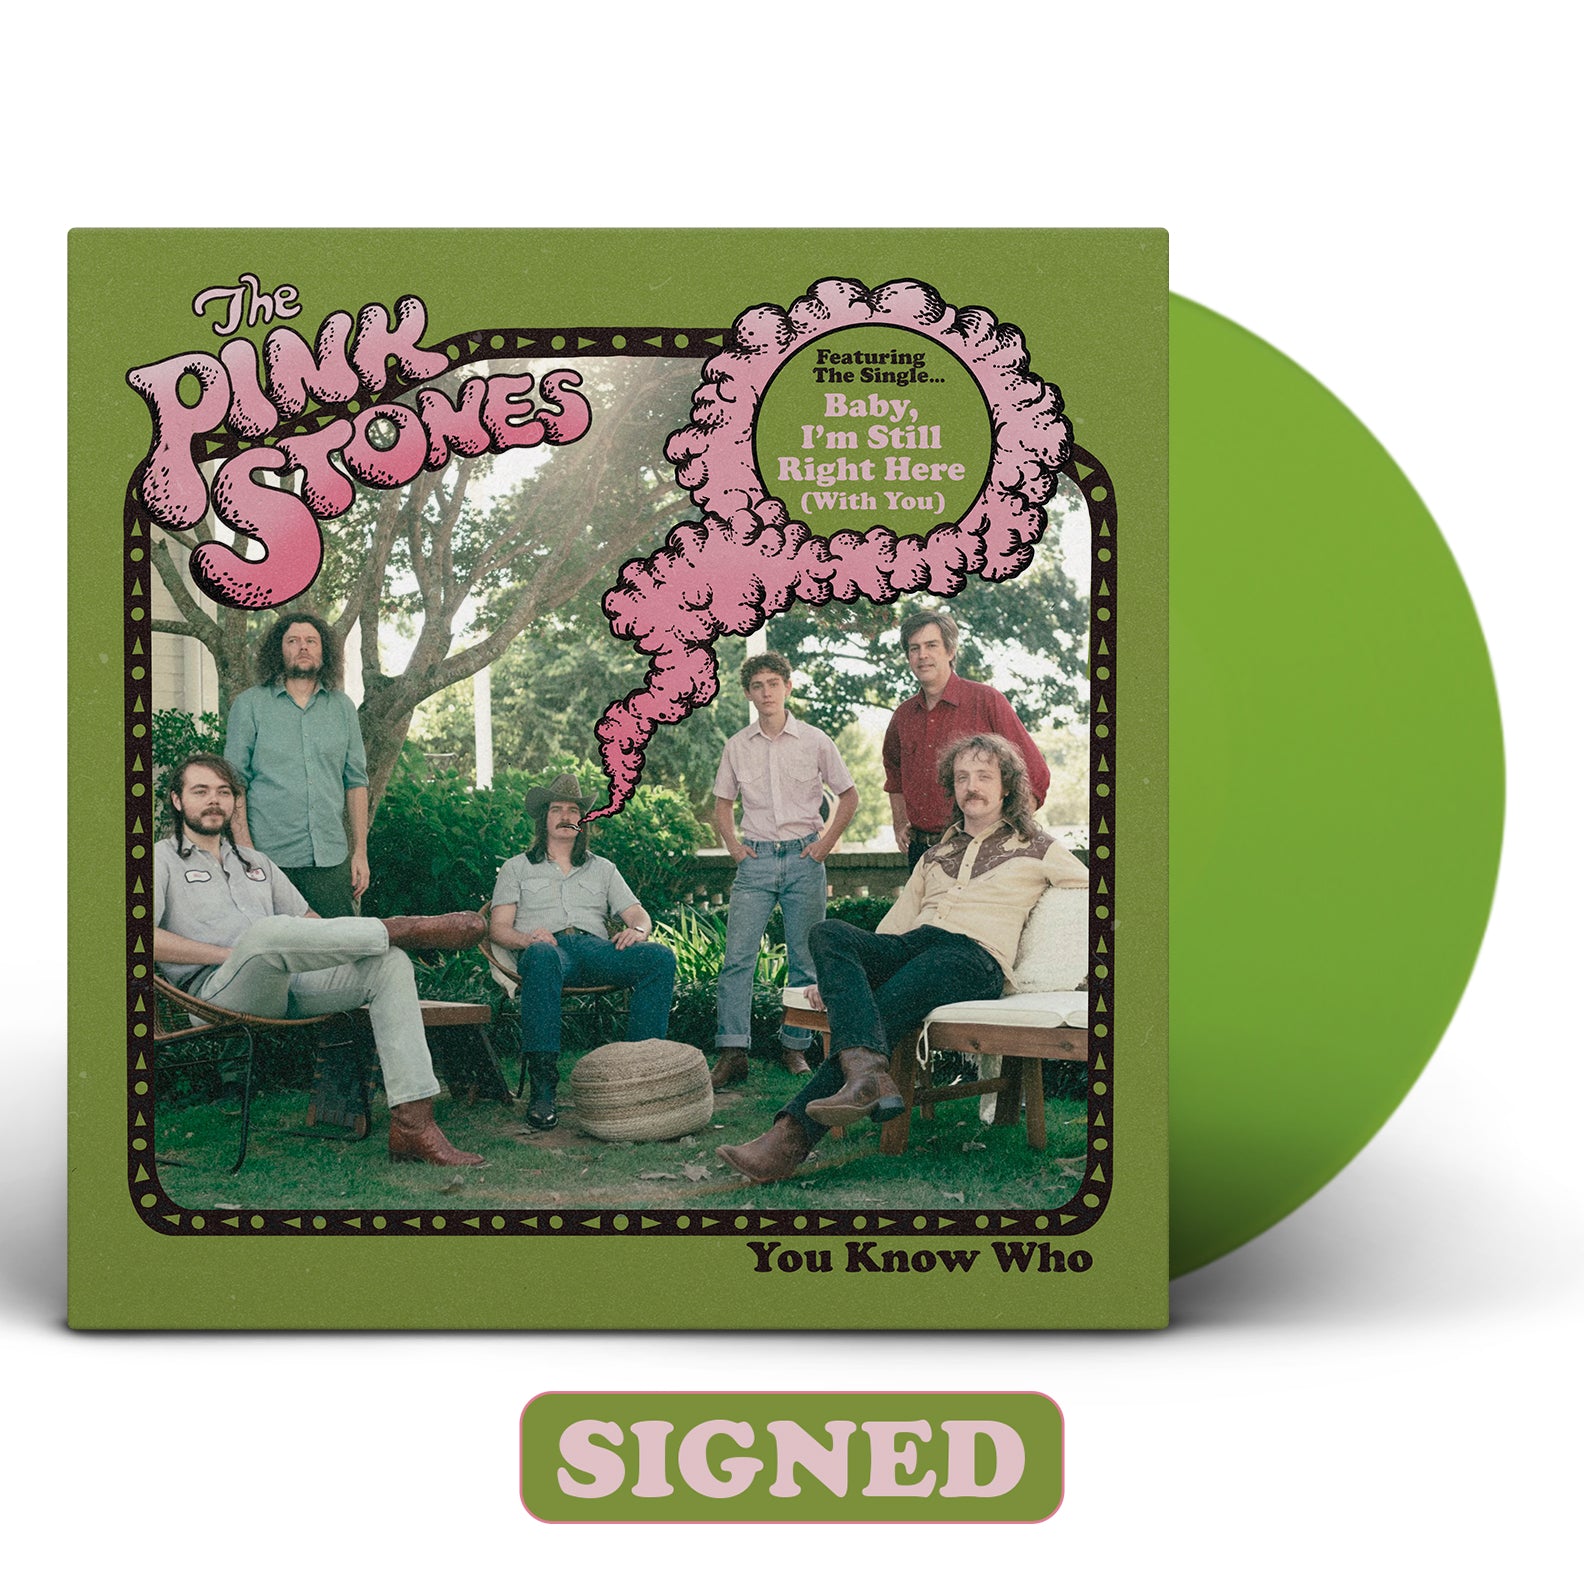 The Pink Stones - You Know Who [SIGNED Color Vinyl]